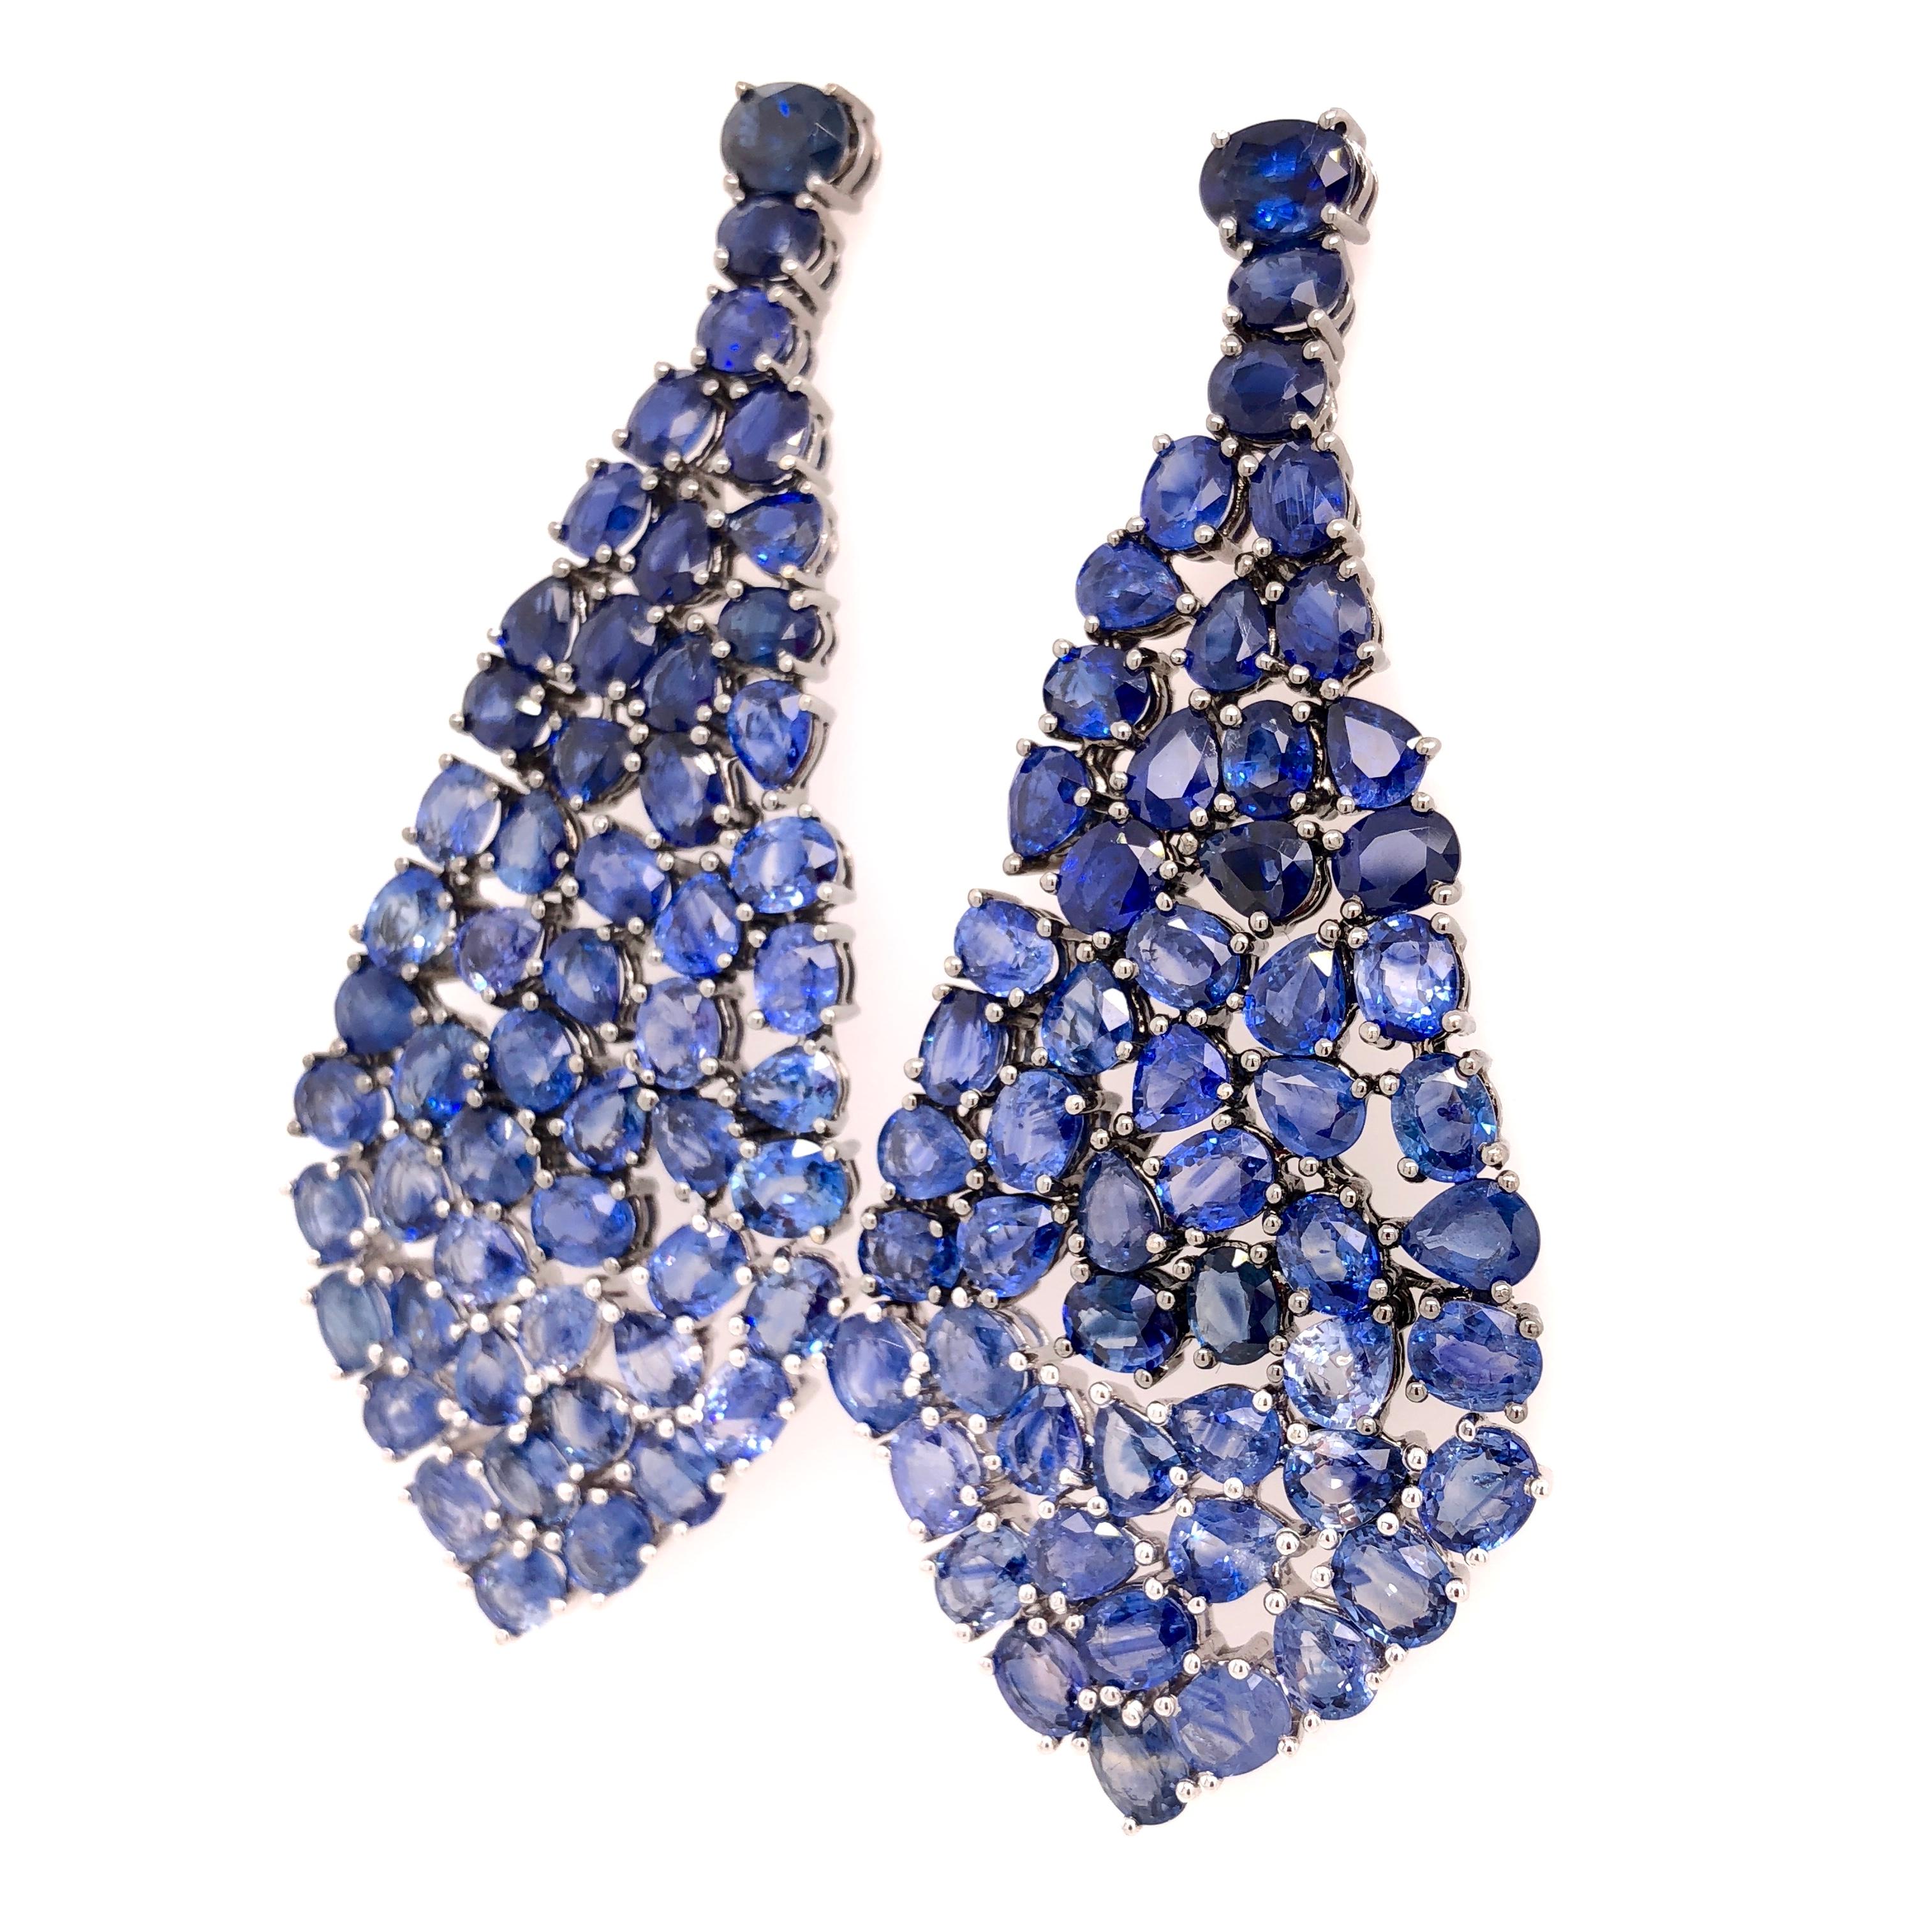 Midnight Blue Collection 

Blue Sapphire gradient drop dangle chandelier earrings set in 18K black and white gold.

Blue Sapphire: 49.29ct total weight.
Height - is approximately 7.2cm/2.84inches.
Width - is approximately 3.3cm/1.30inches.